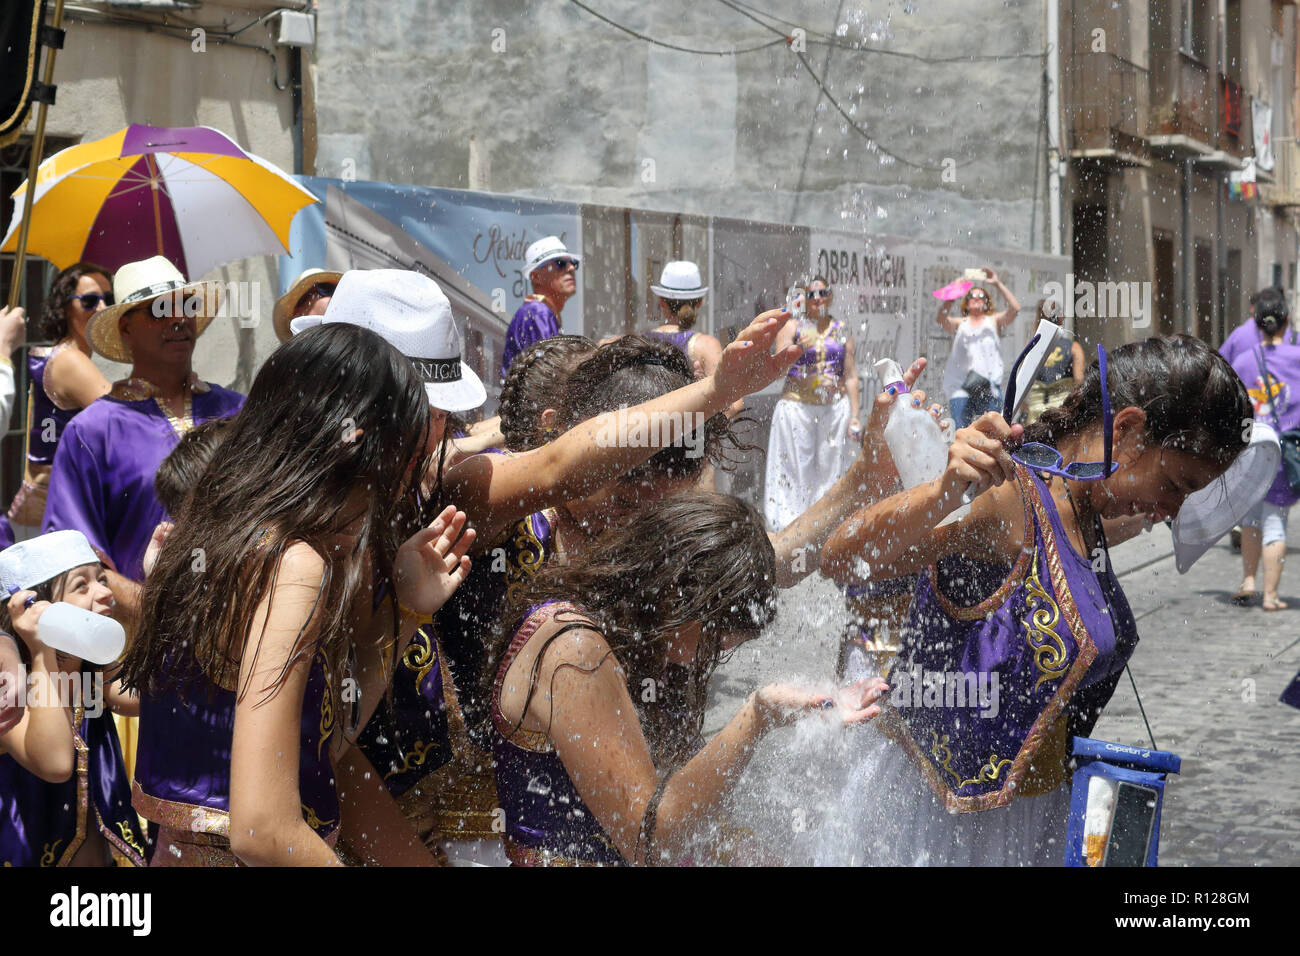 People under a water jet from Moros Almohabenos company on a street parade during the Moors and Christians historical reenactment in Orihuela, Spain Stock Photo